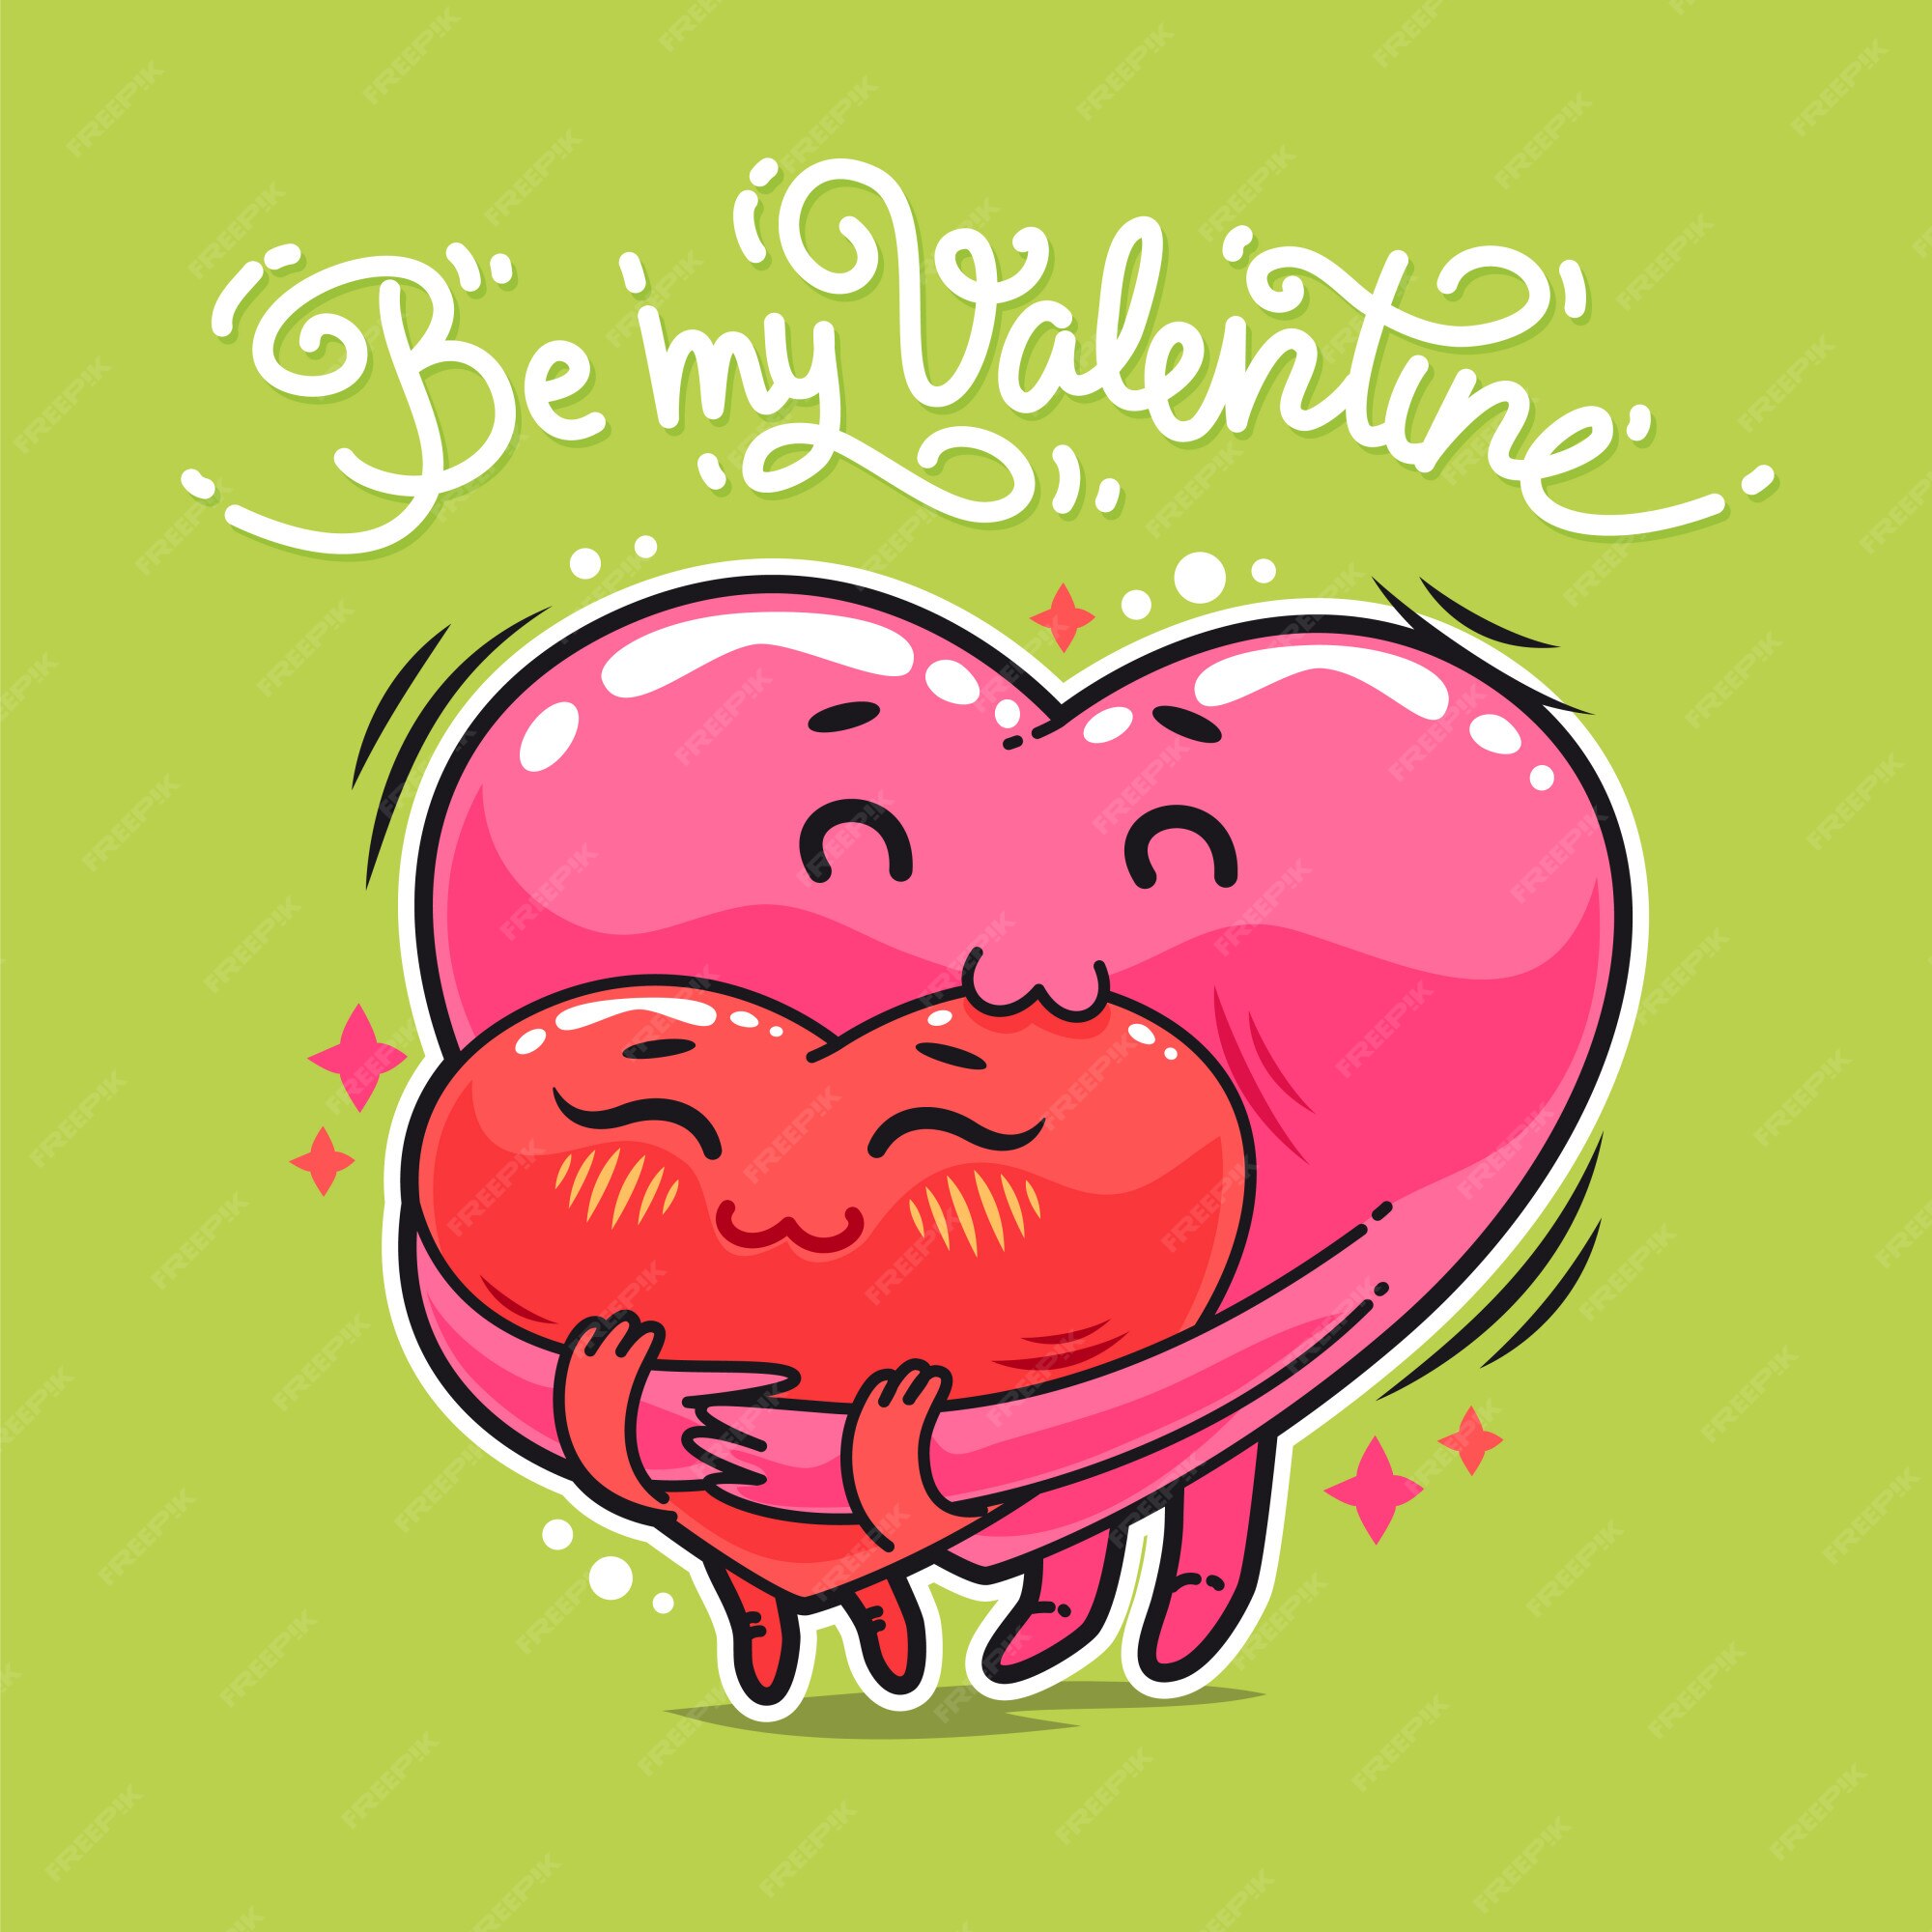 Valentines Day Funny Images - Free Download on Freepik